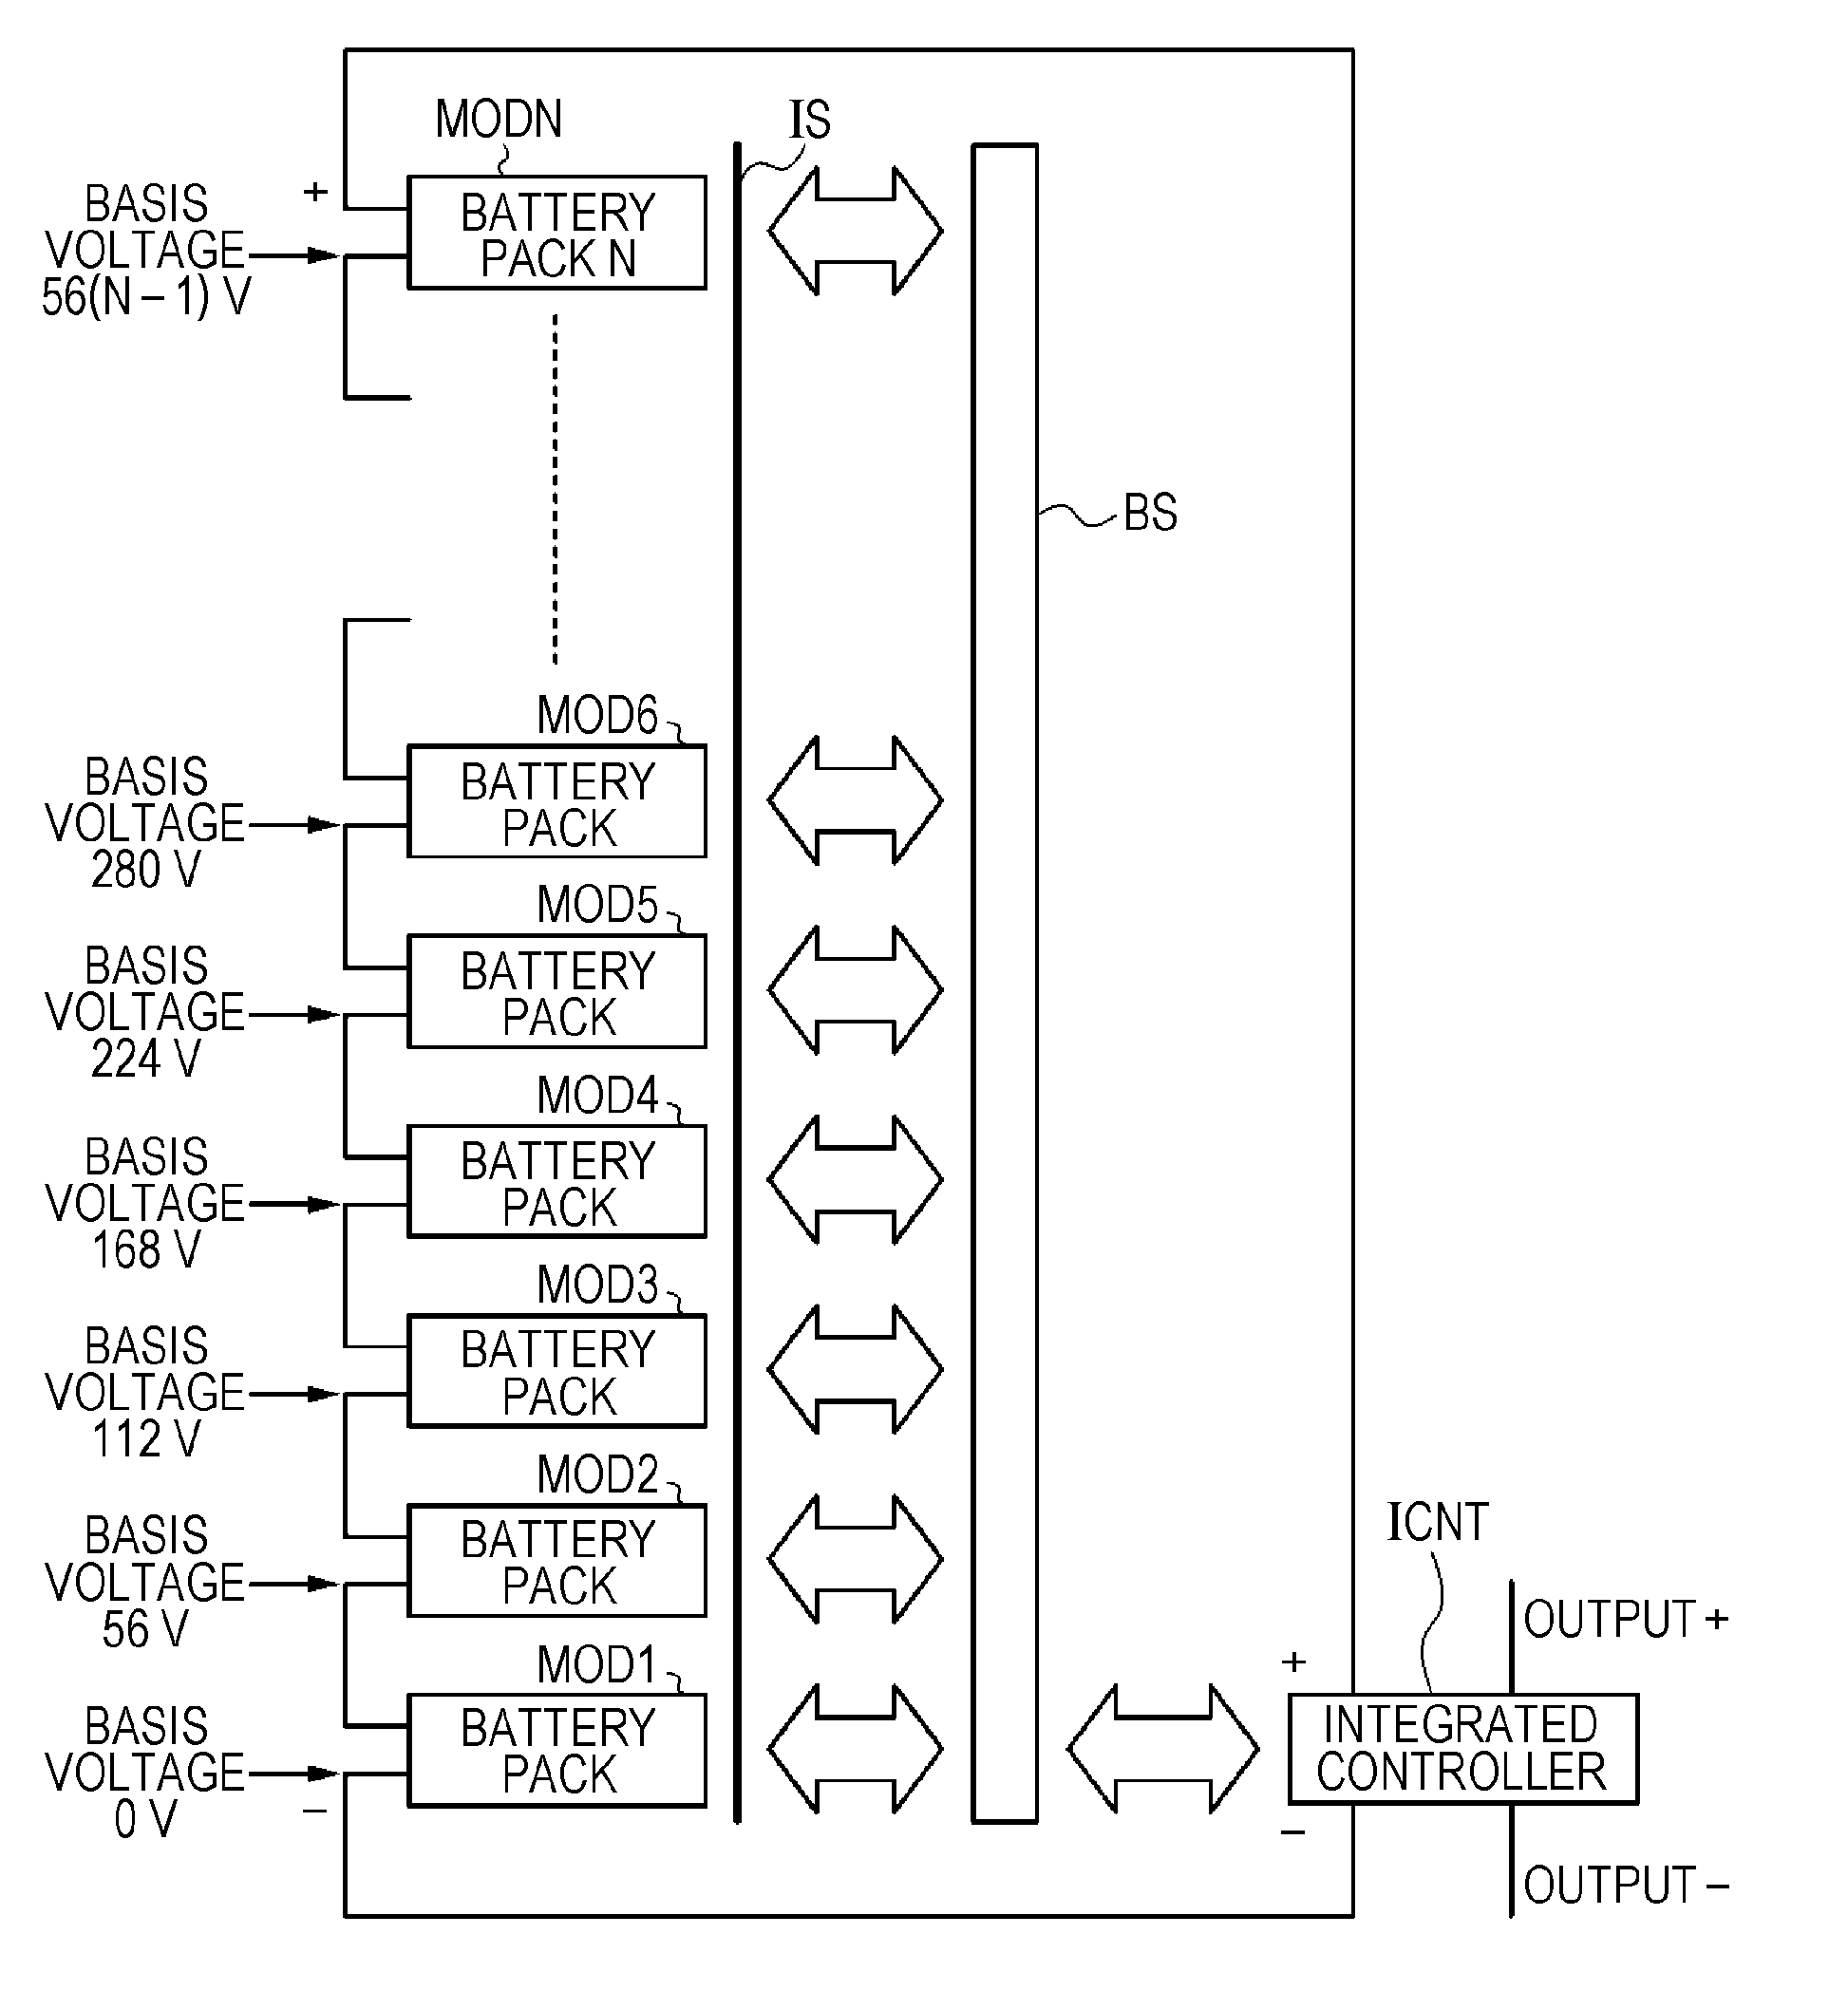 Multi-battery pack battery system with direct communication between controller and the battery packs